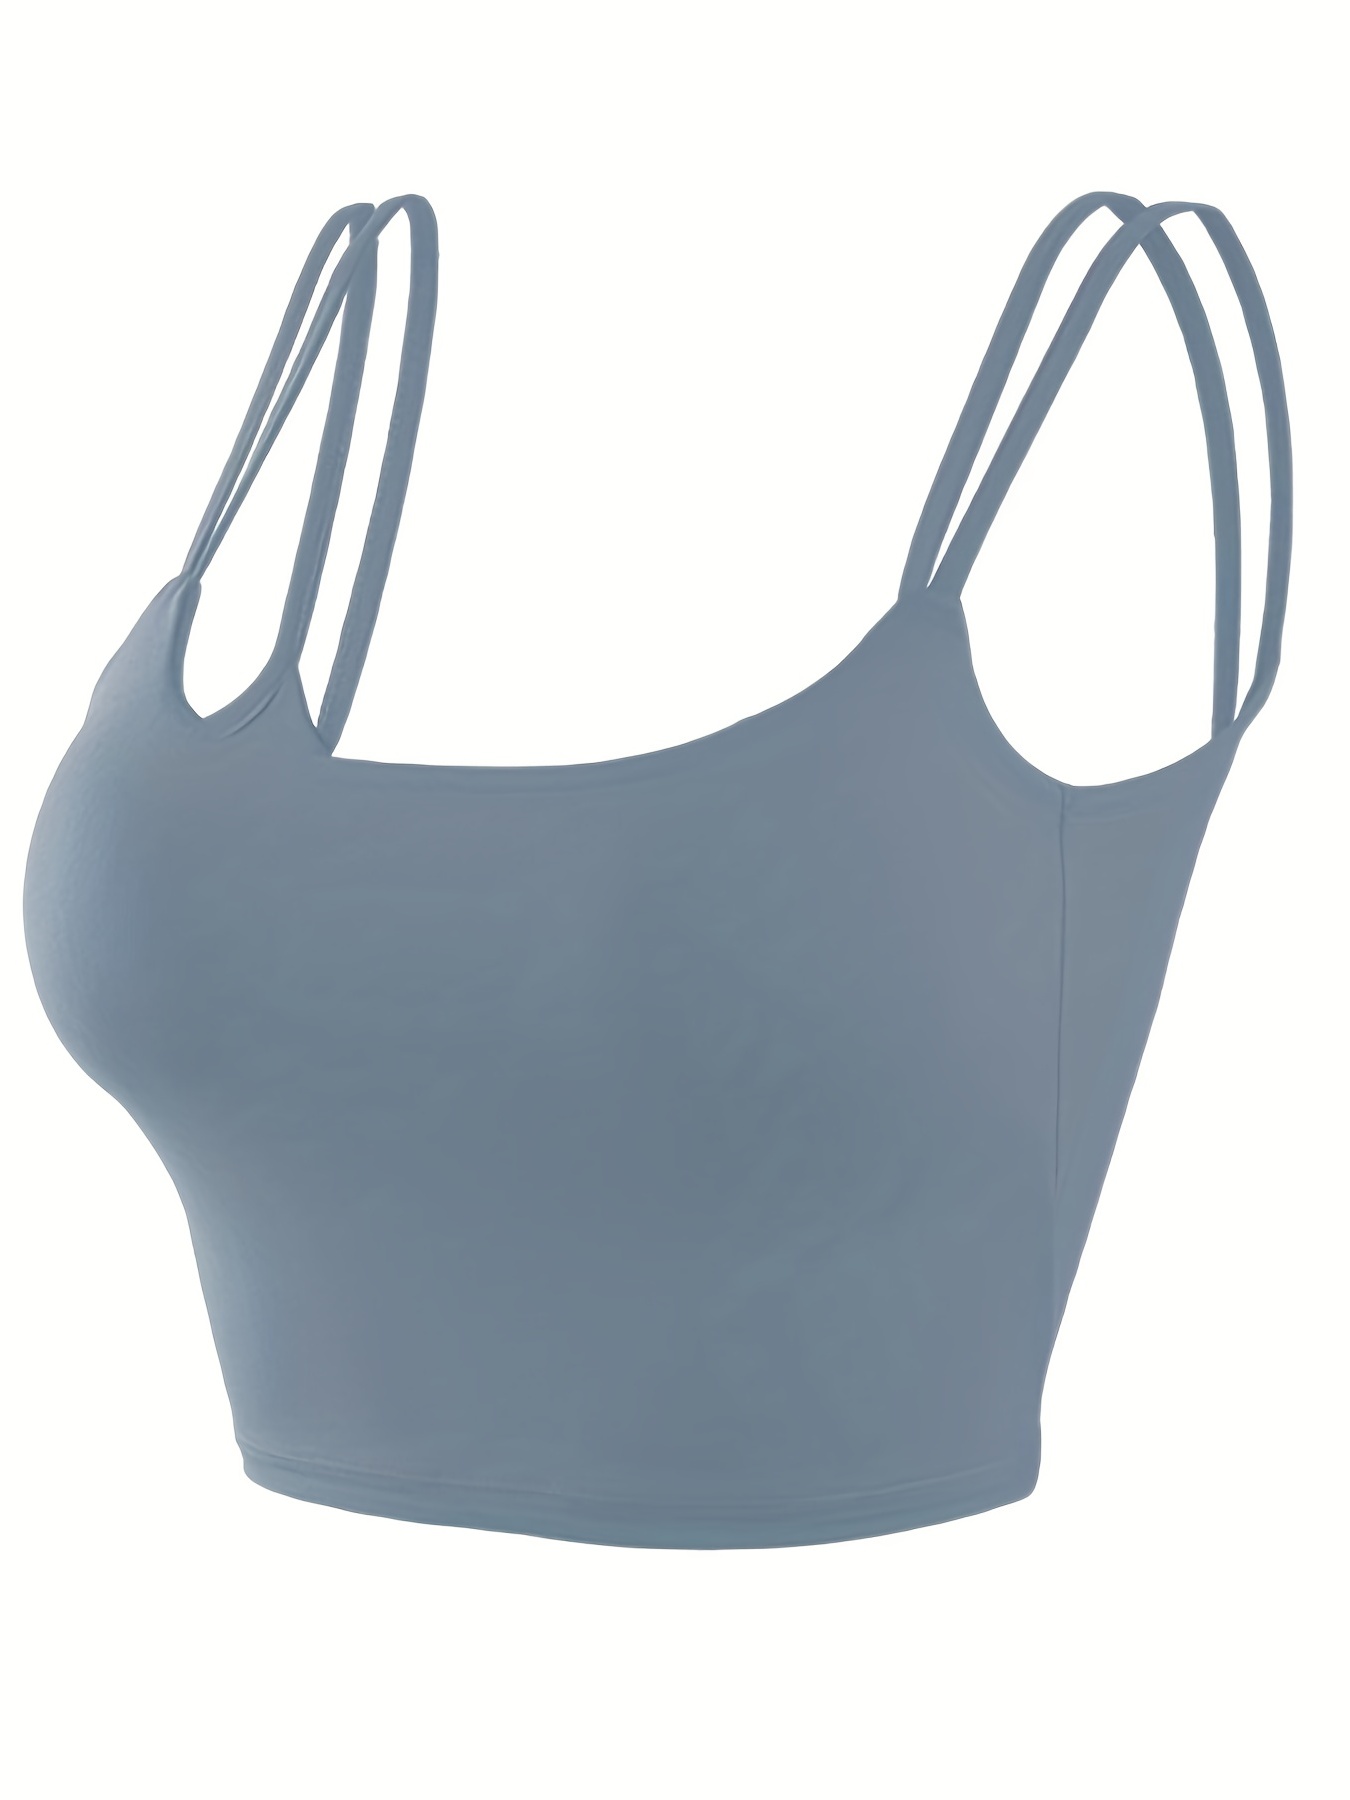 Women Sports Bras Spaghetti Straps Padded with Built in Bra Gym Crop Tank  Tops